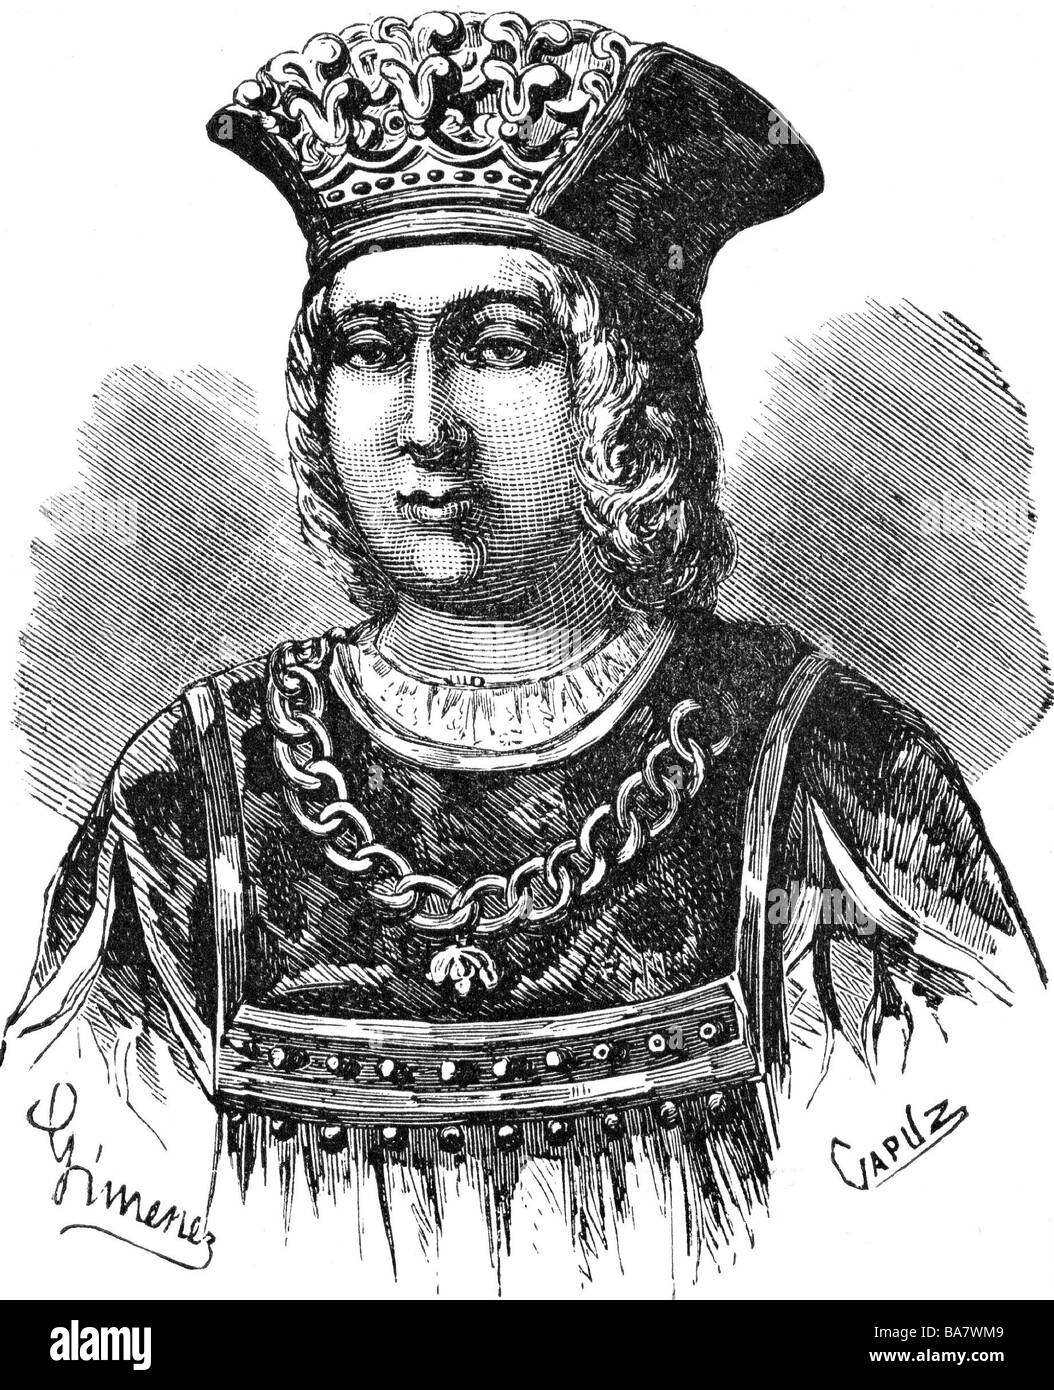 Isabella I, 22.4.1451 - 26.11.1504, Queen of Castile 1474 - 1504, portrait, wood engraving, Stock Photo